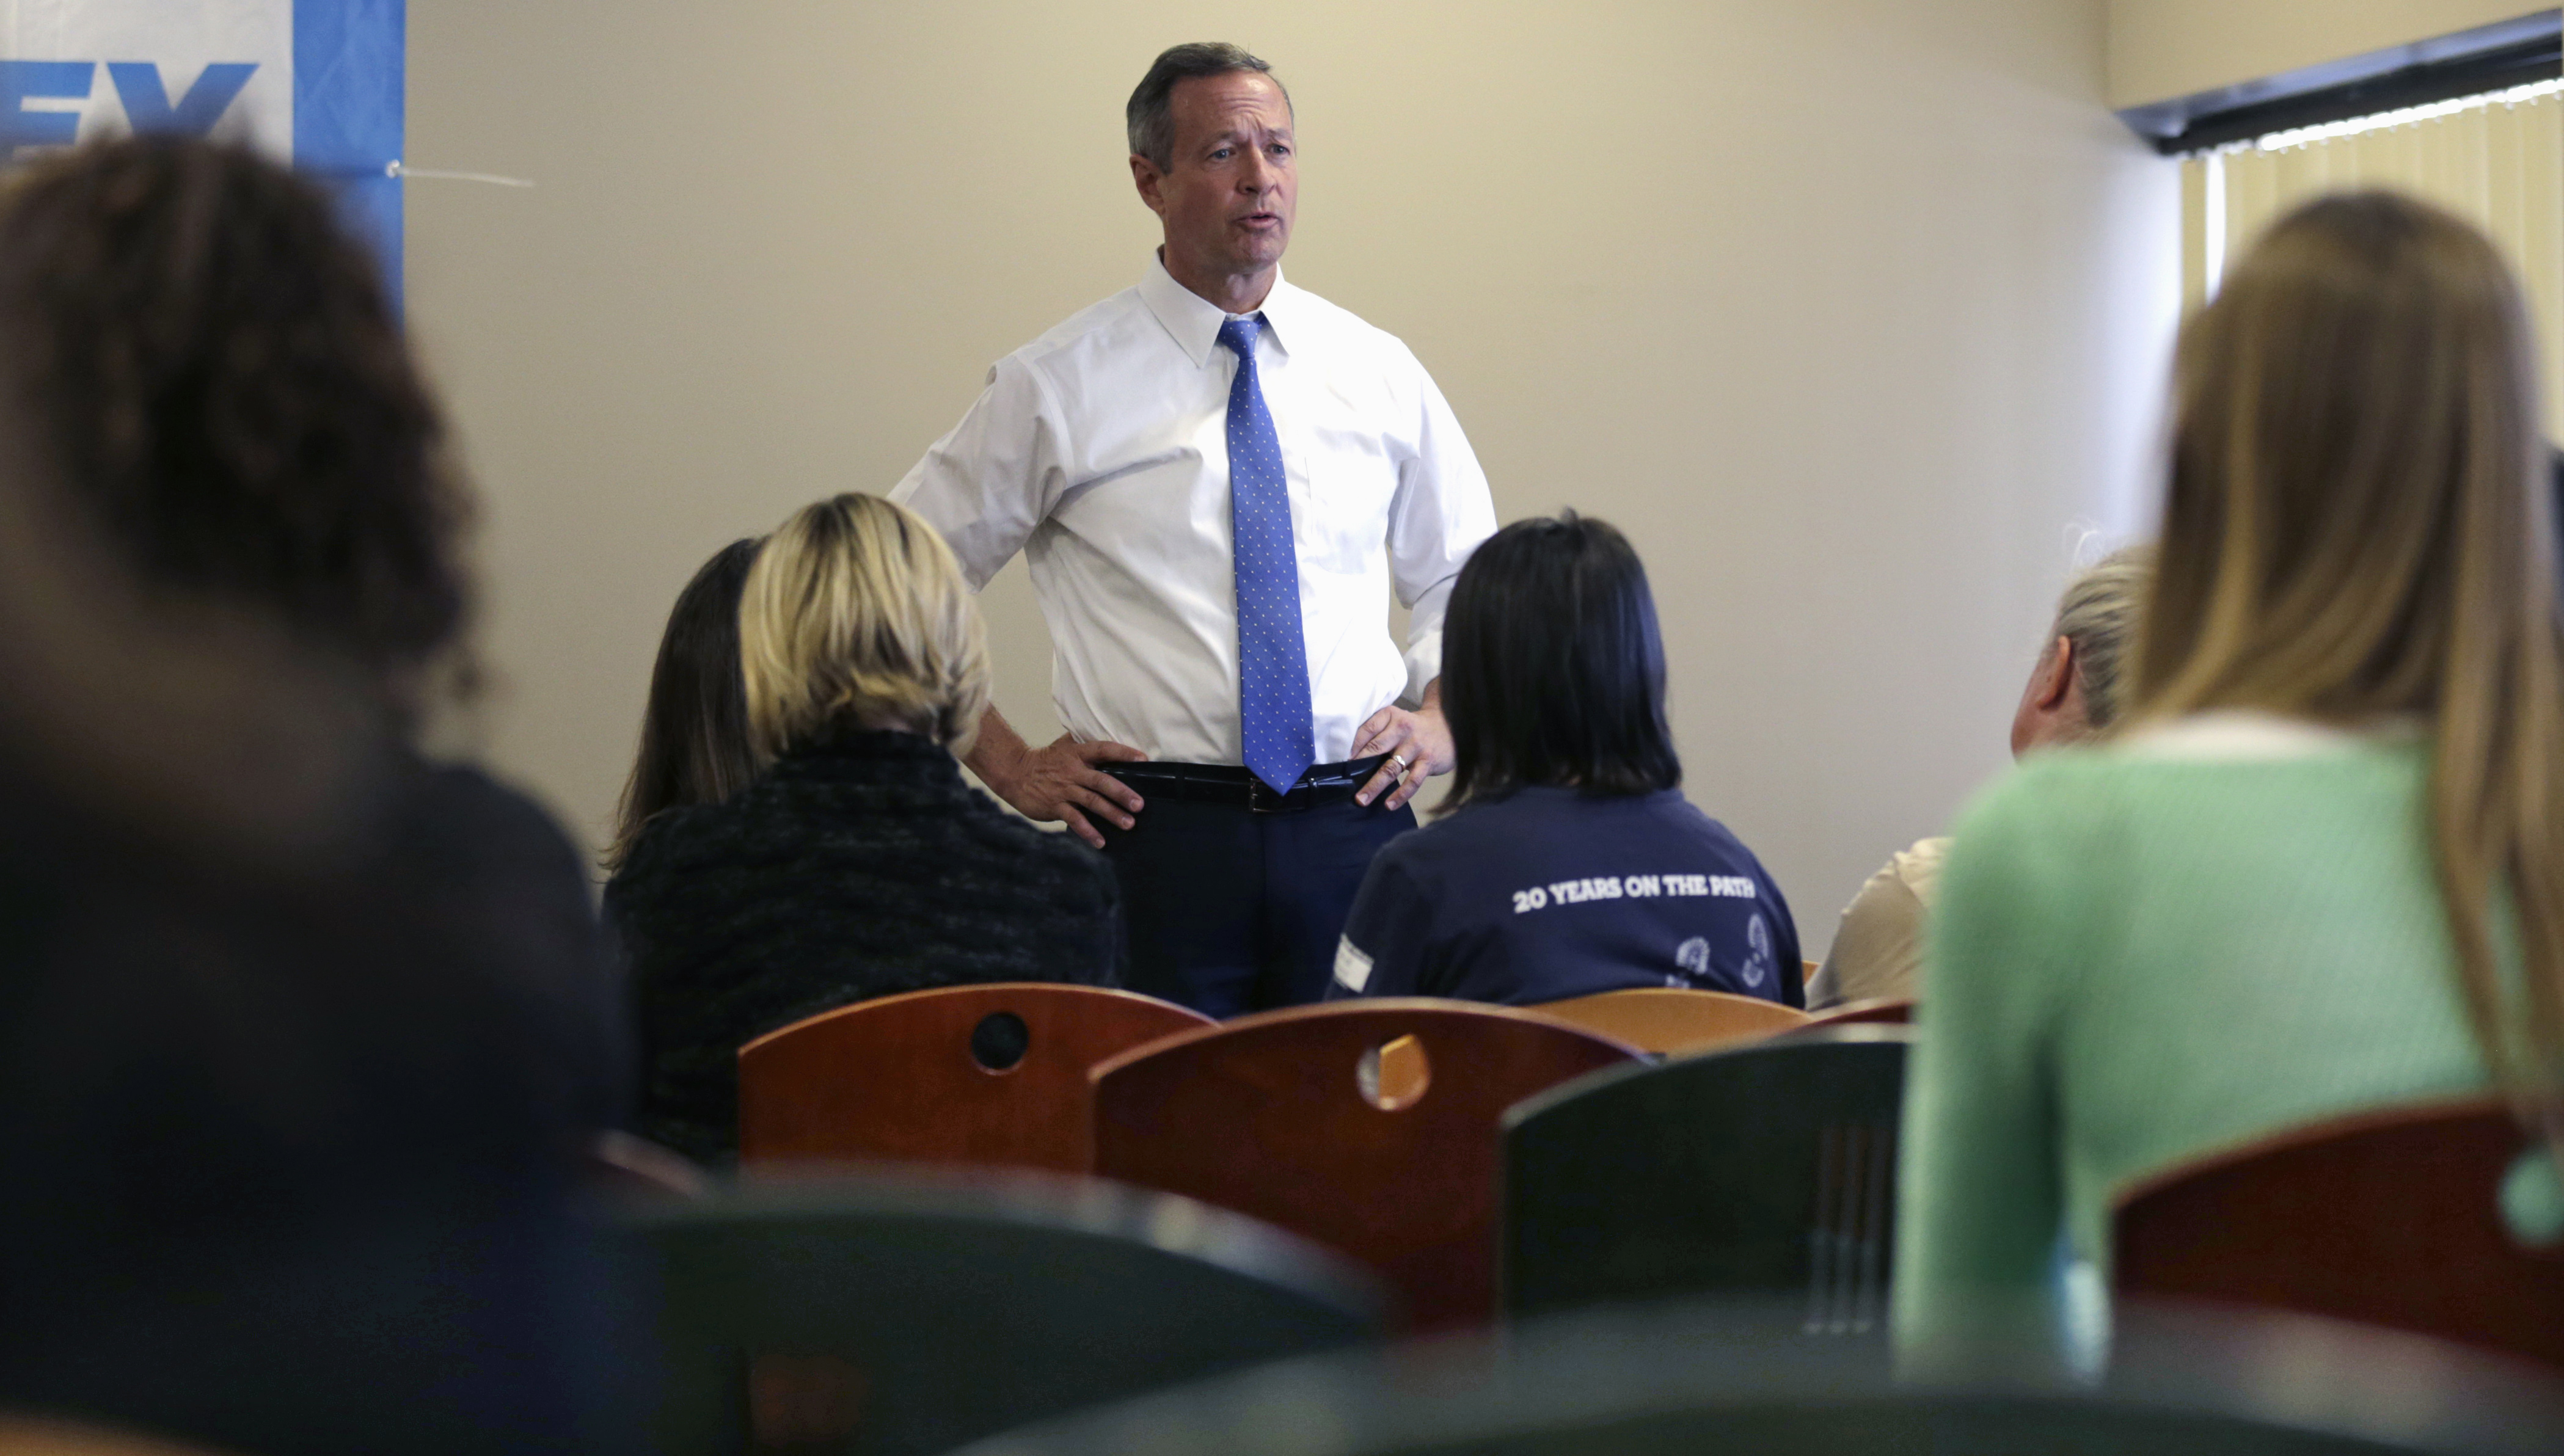 Democratic presidential candidate, former Maryland Gov. Martin O'Malley talks with employees during a campaign stop at at the Timberland apparel company in Stratham, N.H., Thursday, Jan. 21, 2016. (Charles Krupa—AP)